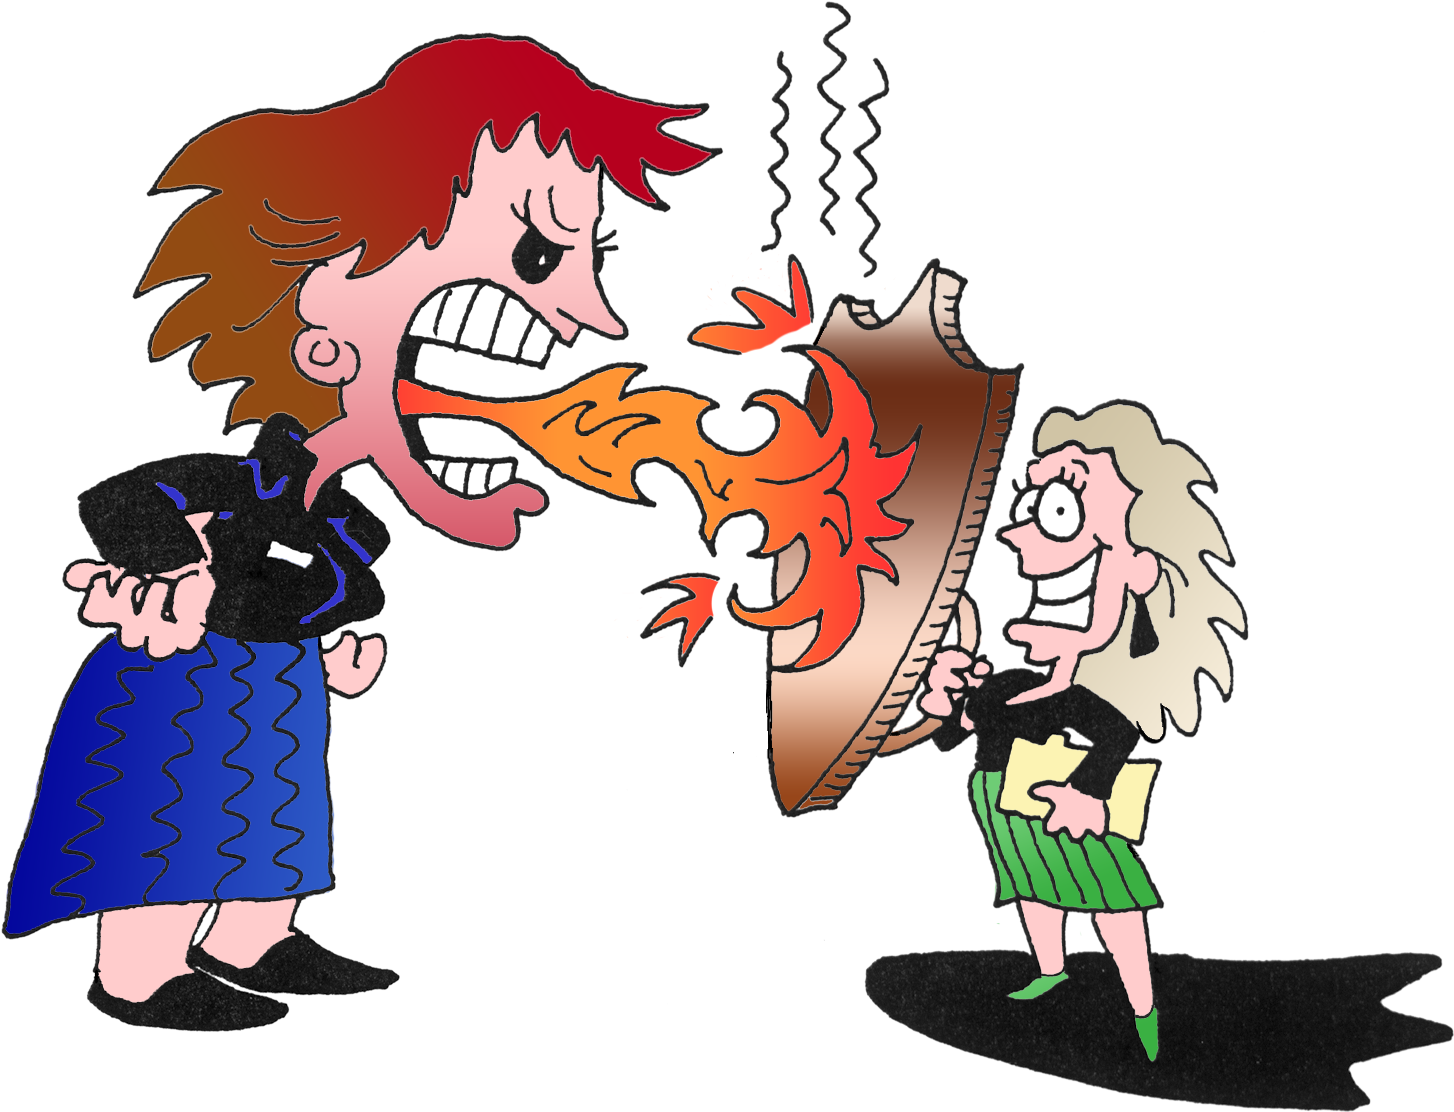 Download and share clipart about Workplace Bullying For Unions - Solutions ...